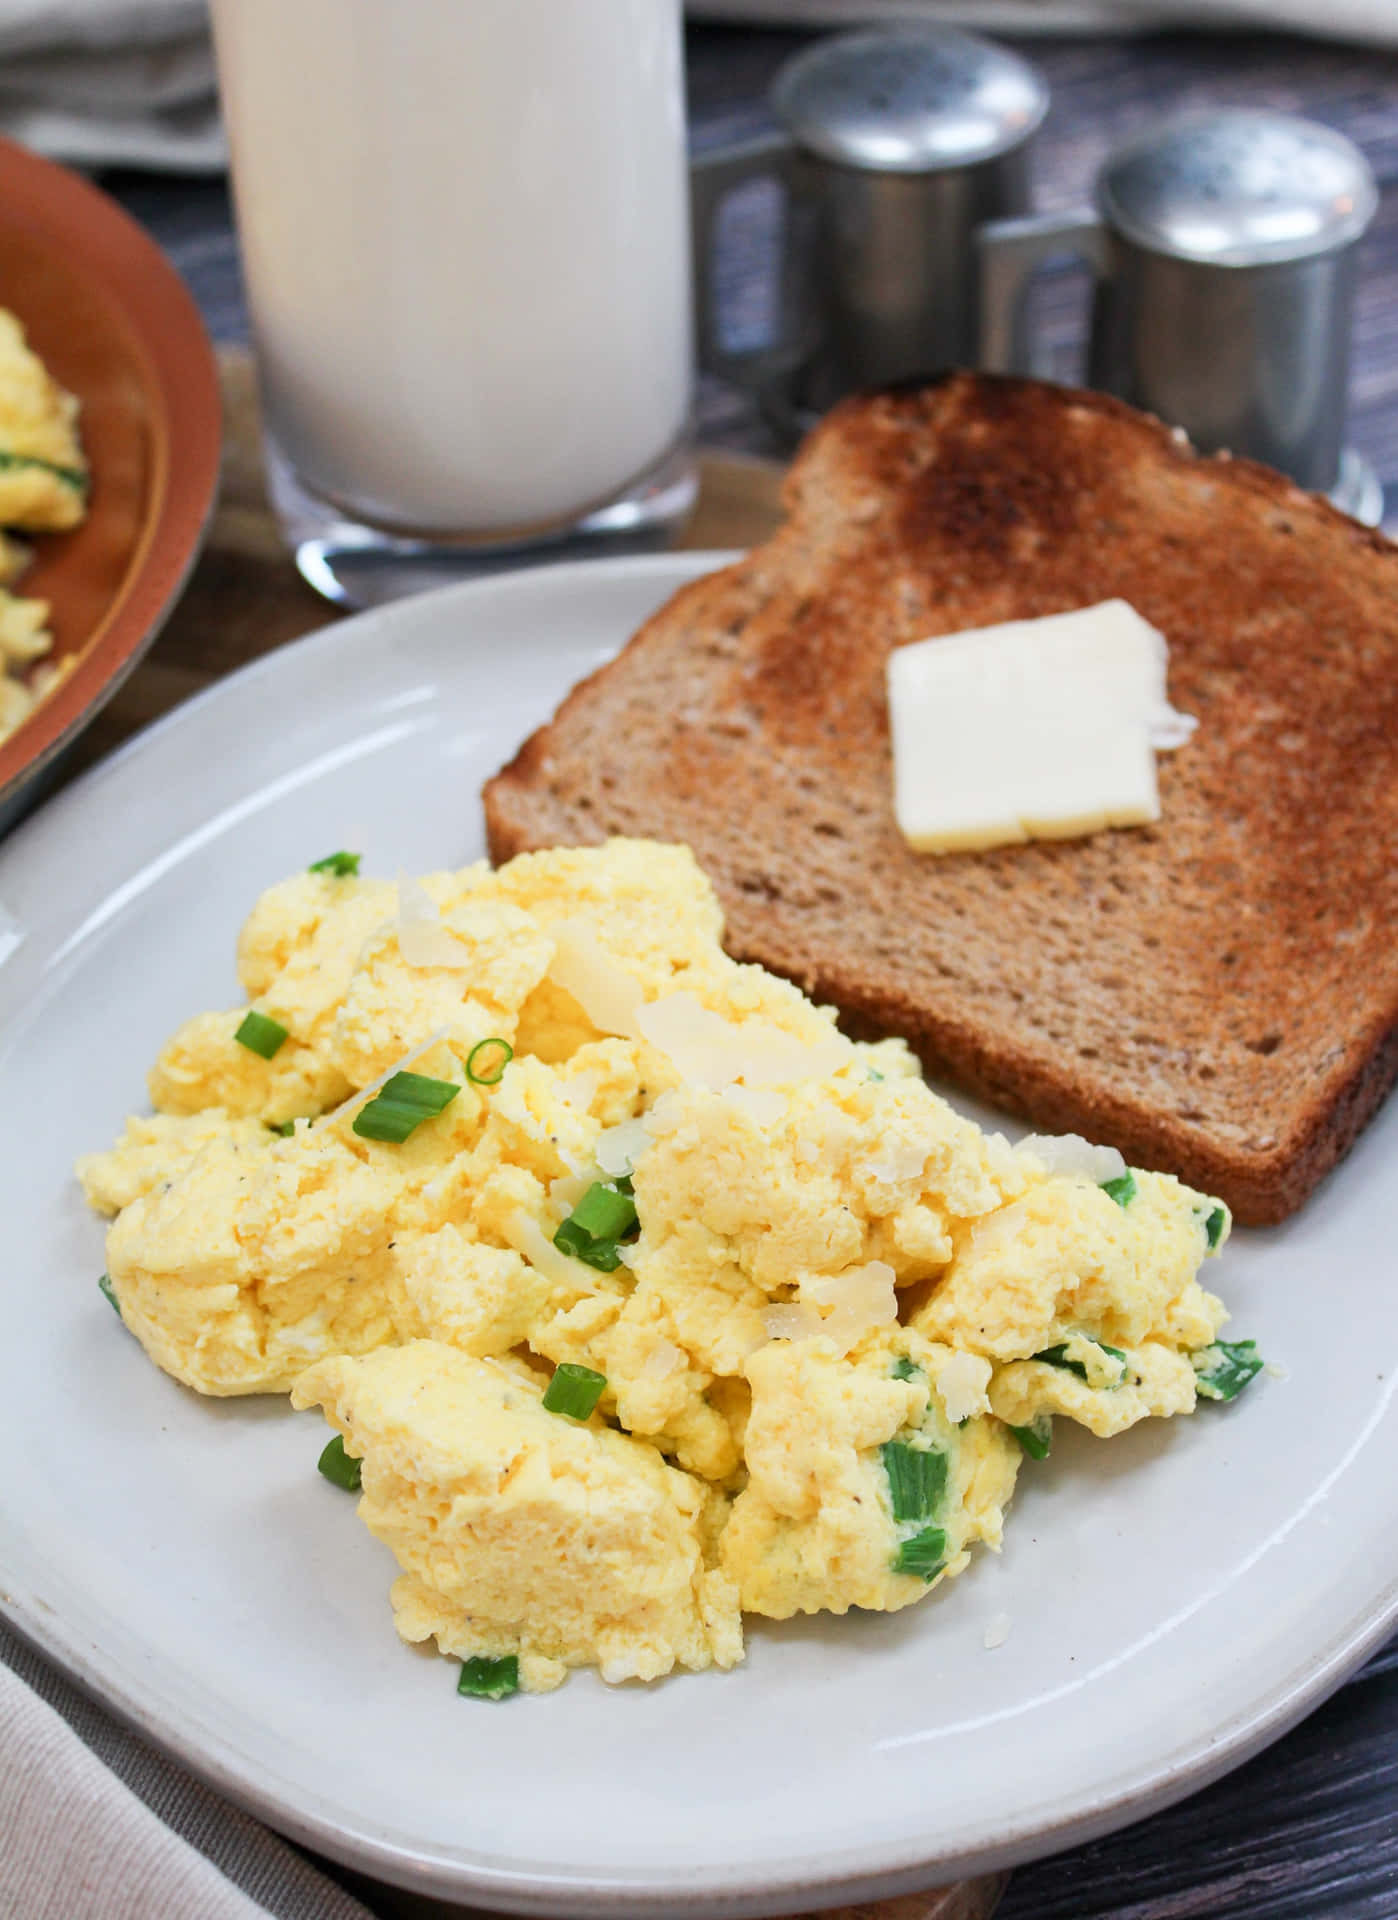 "An easy and simple scramble egg meal!"